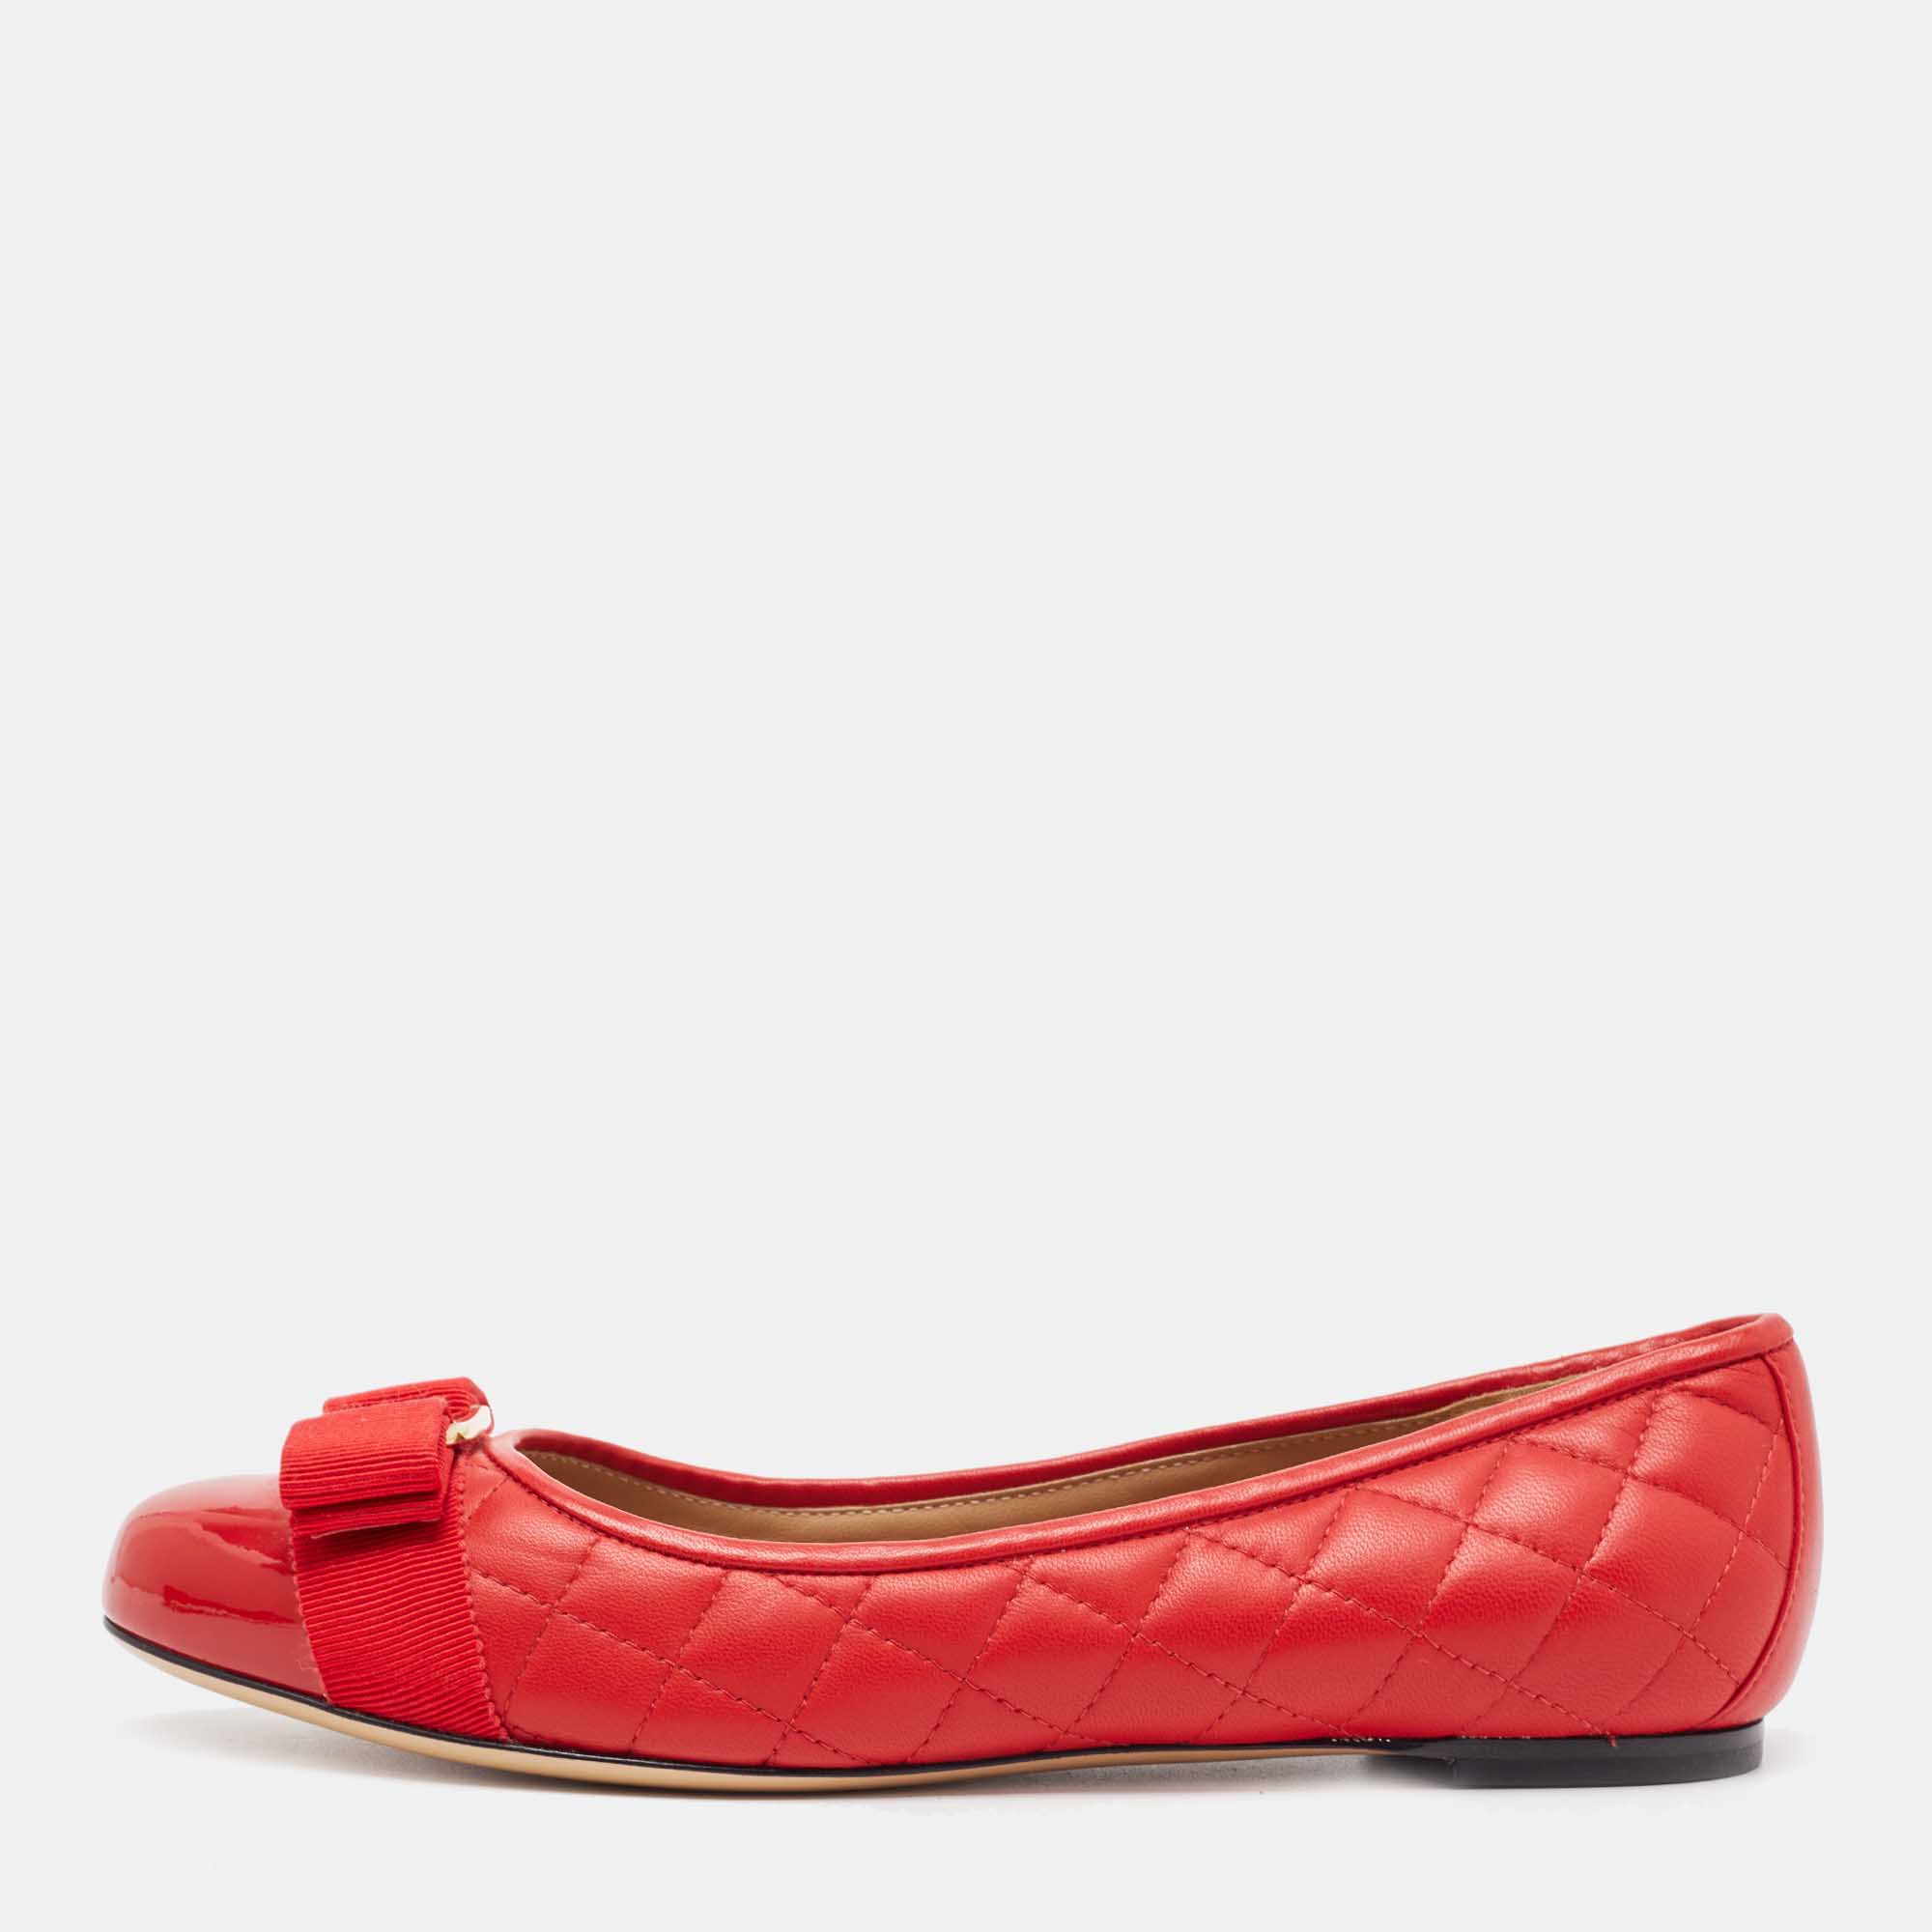 Salvatore Ferragamo Red Patent And Leather Varina Ballet Flats Size 37.5